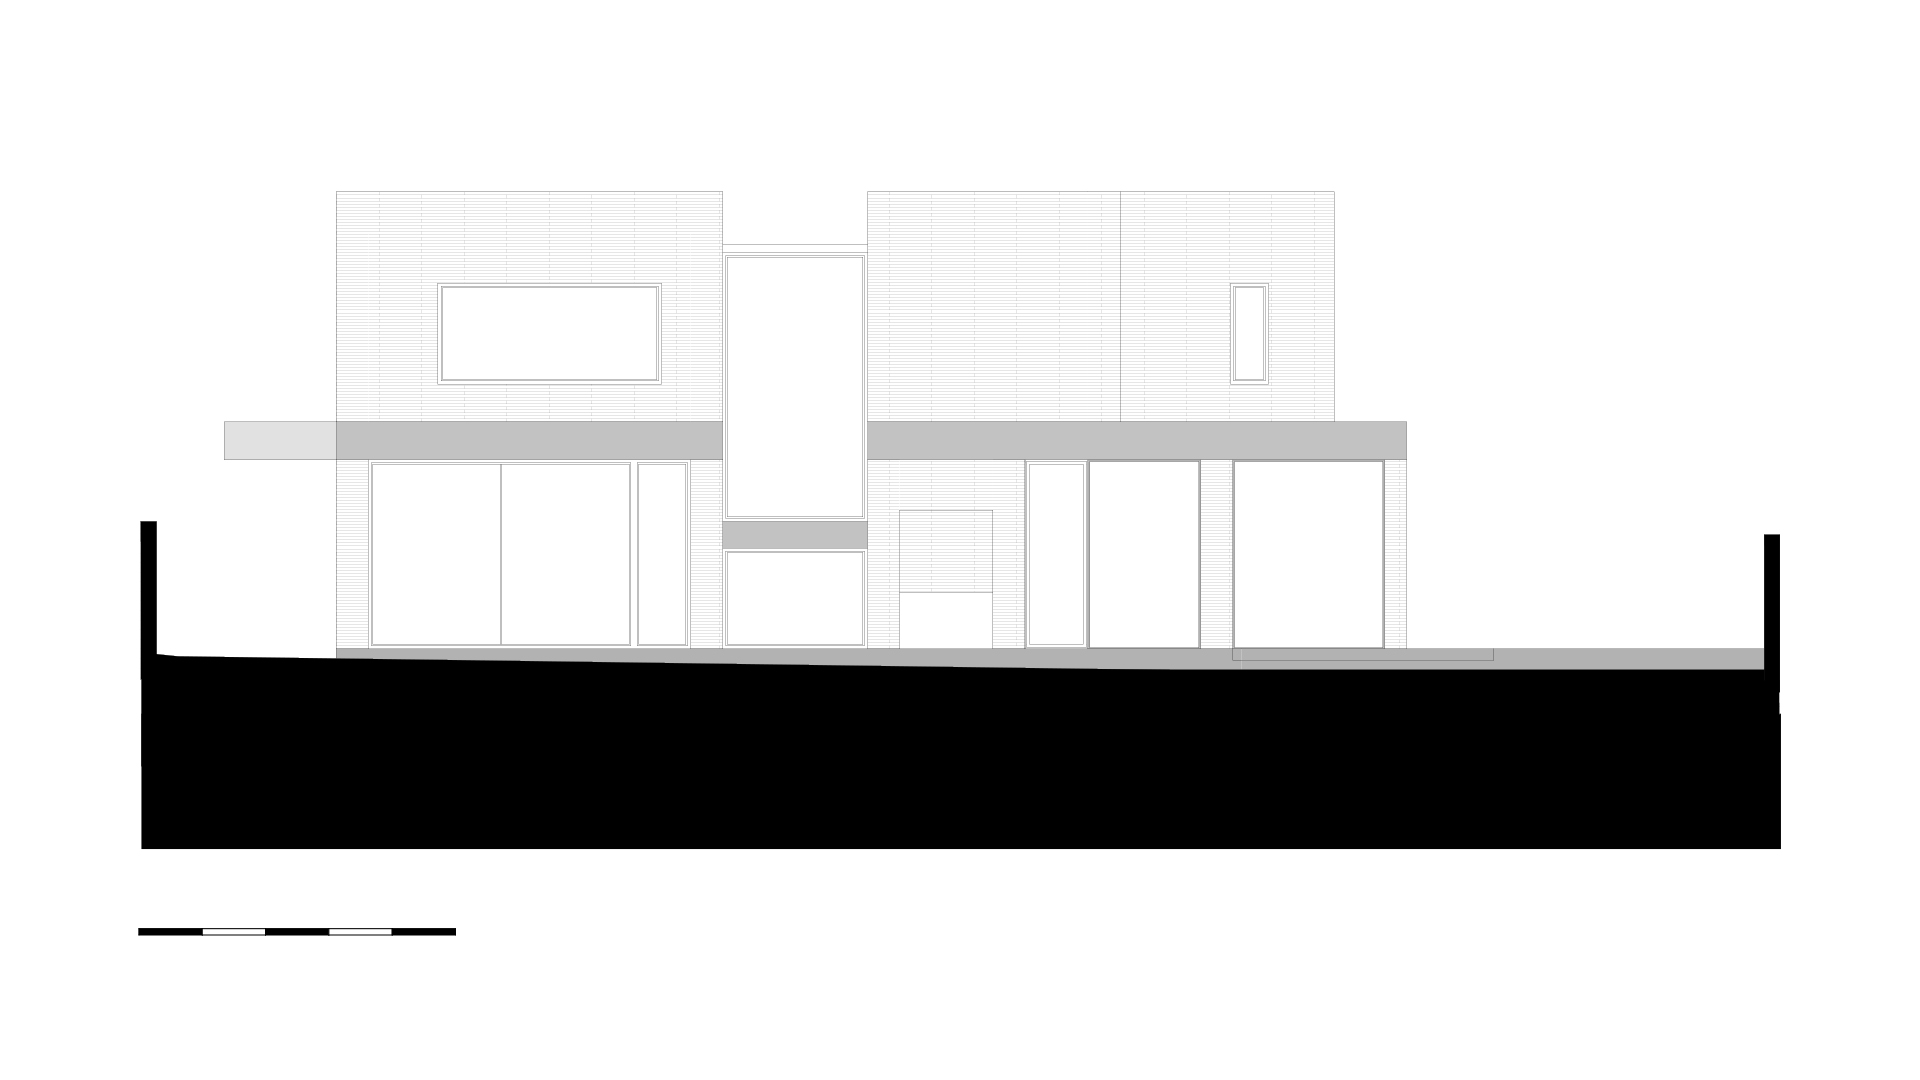 The layout of the house is 2 floors